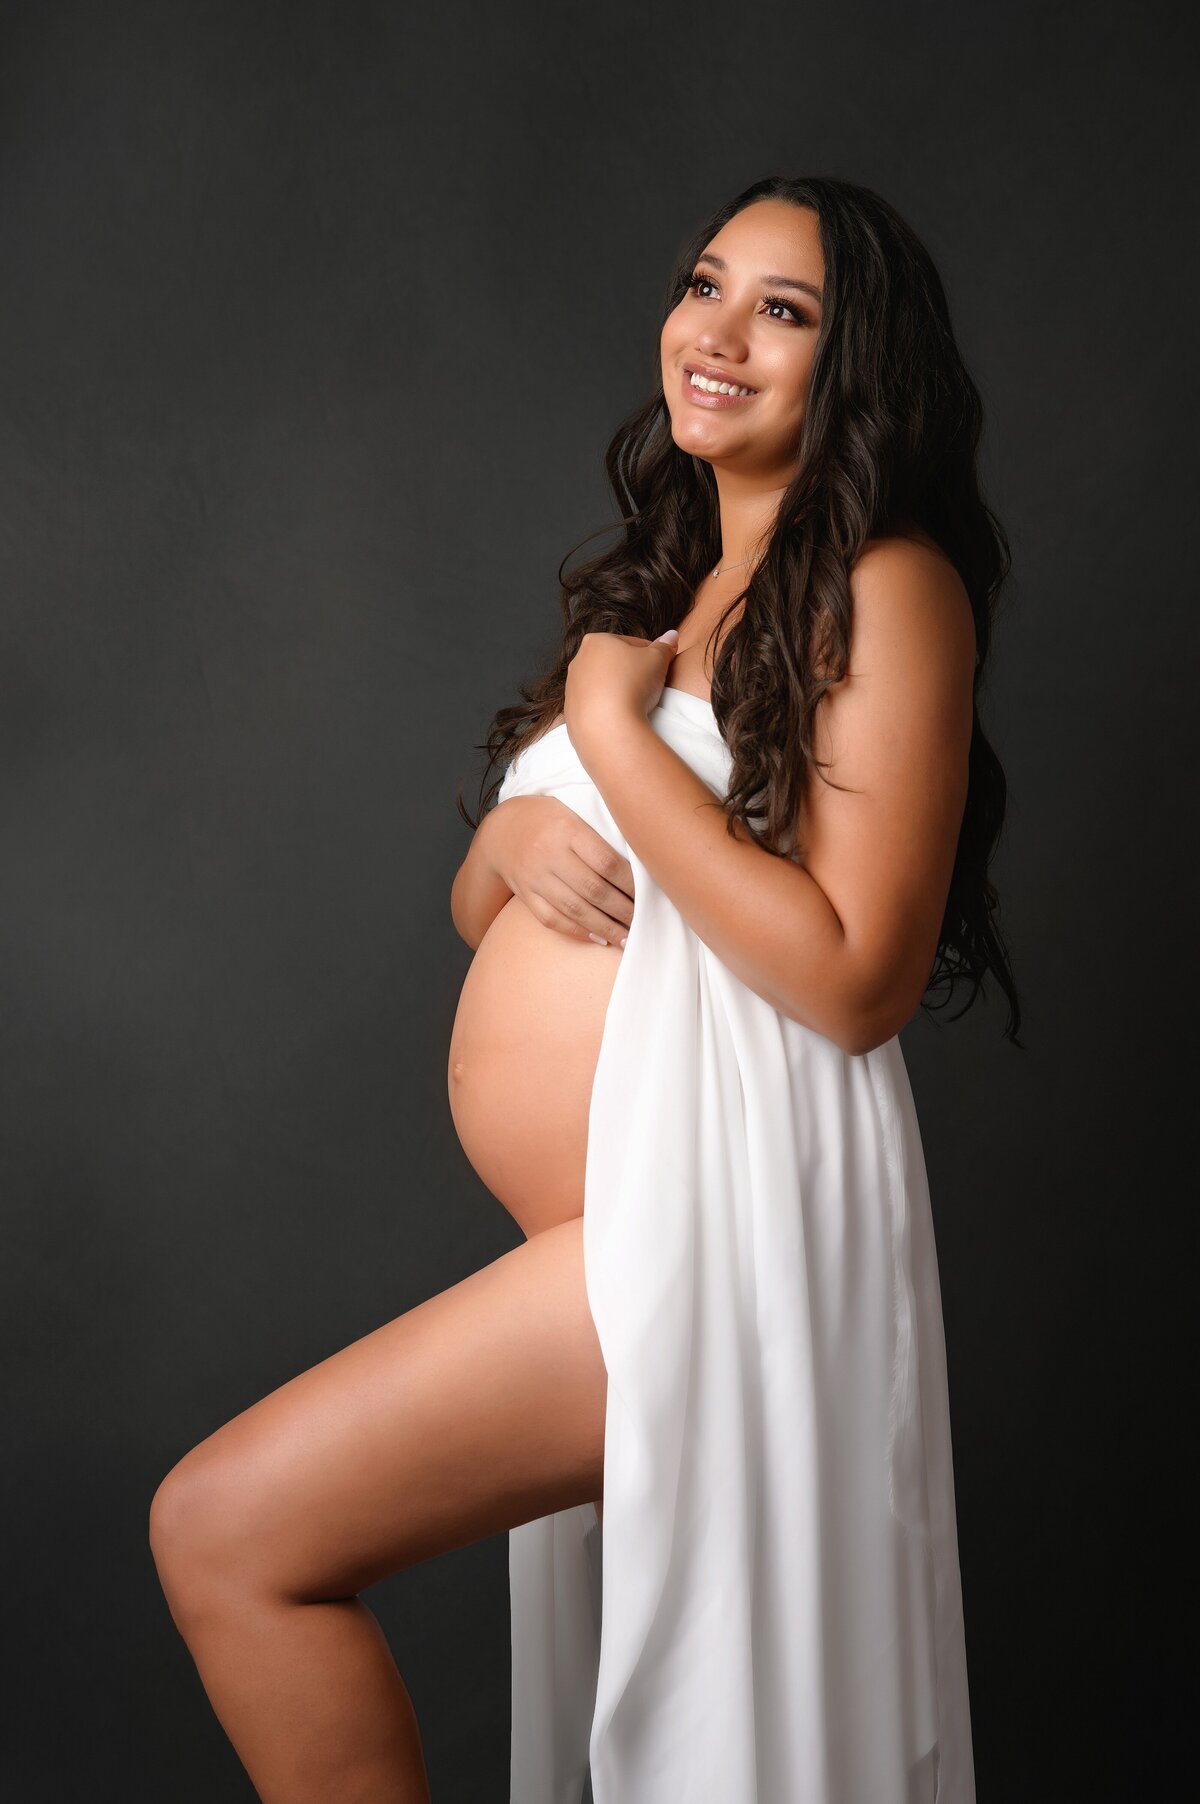 Happy mom to be poses for intimate maternity photoshoot in West Palm Beach studio.